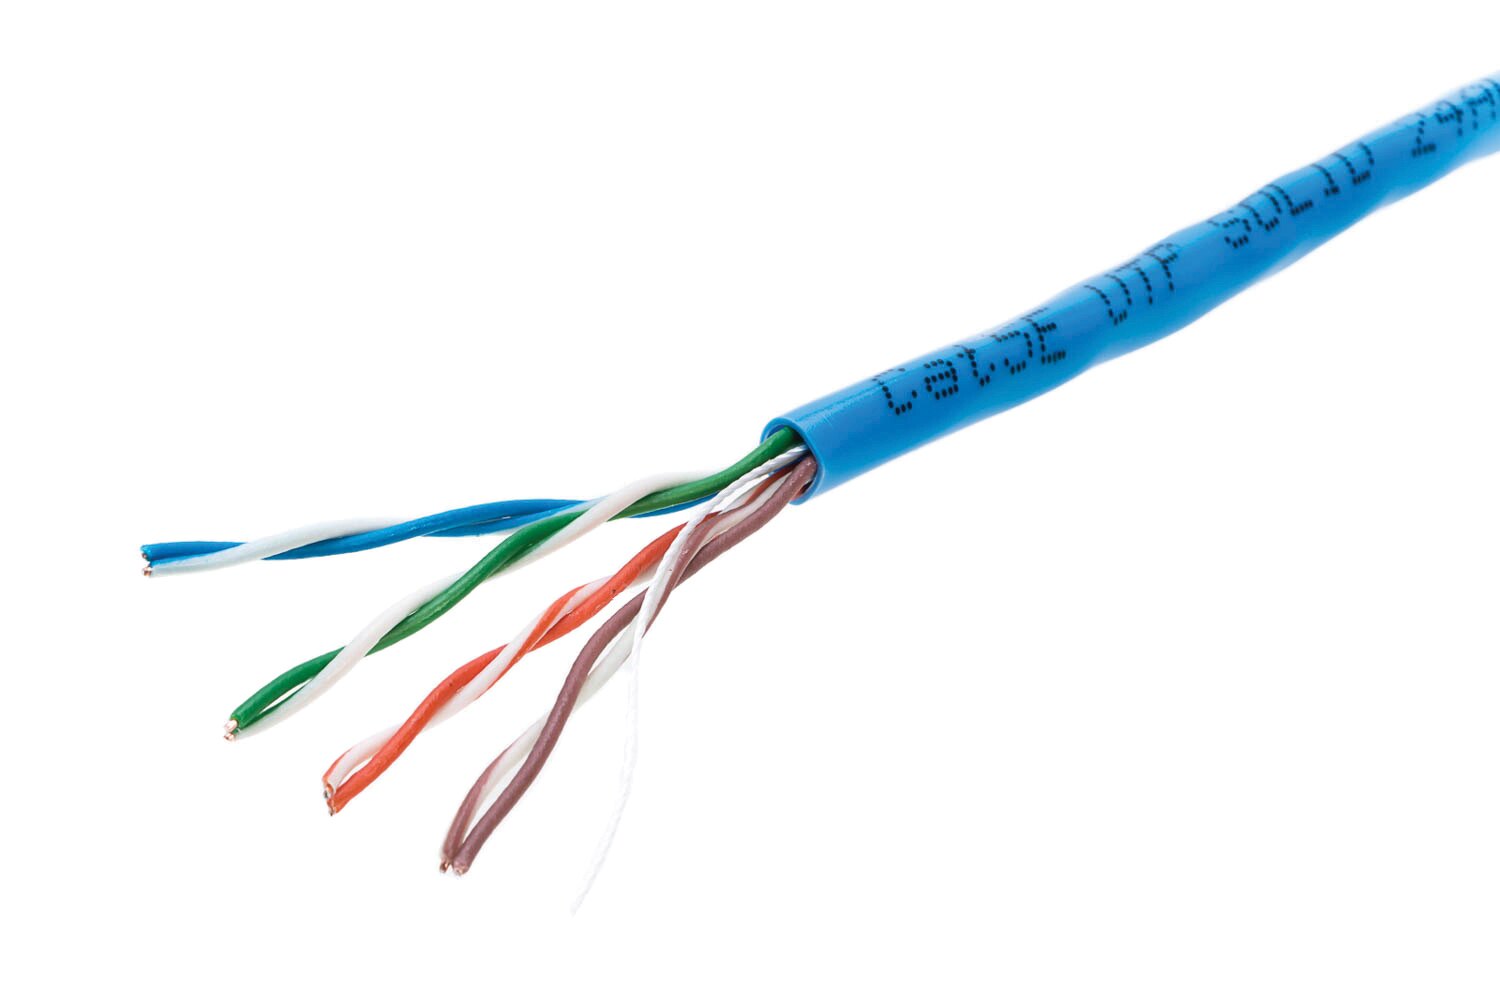 What should I know about the internal cabling